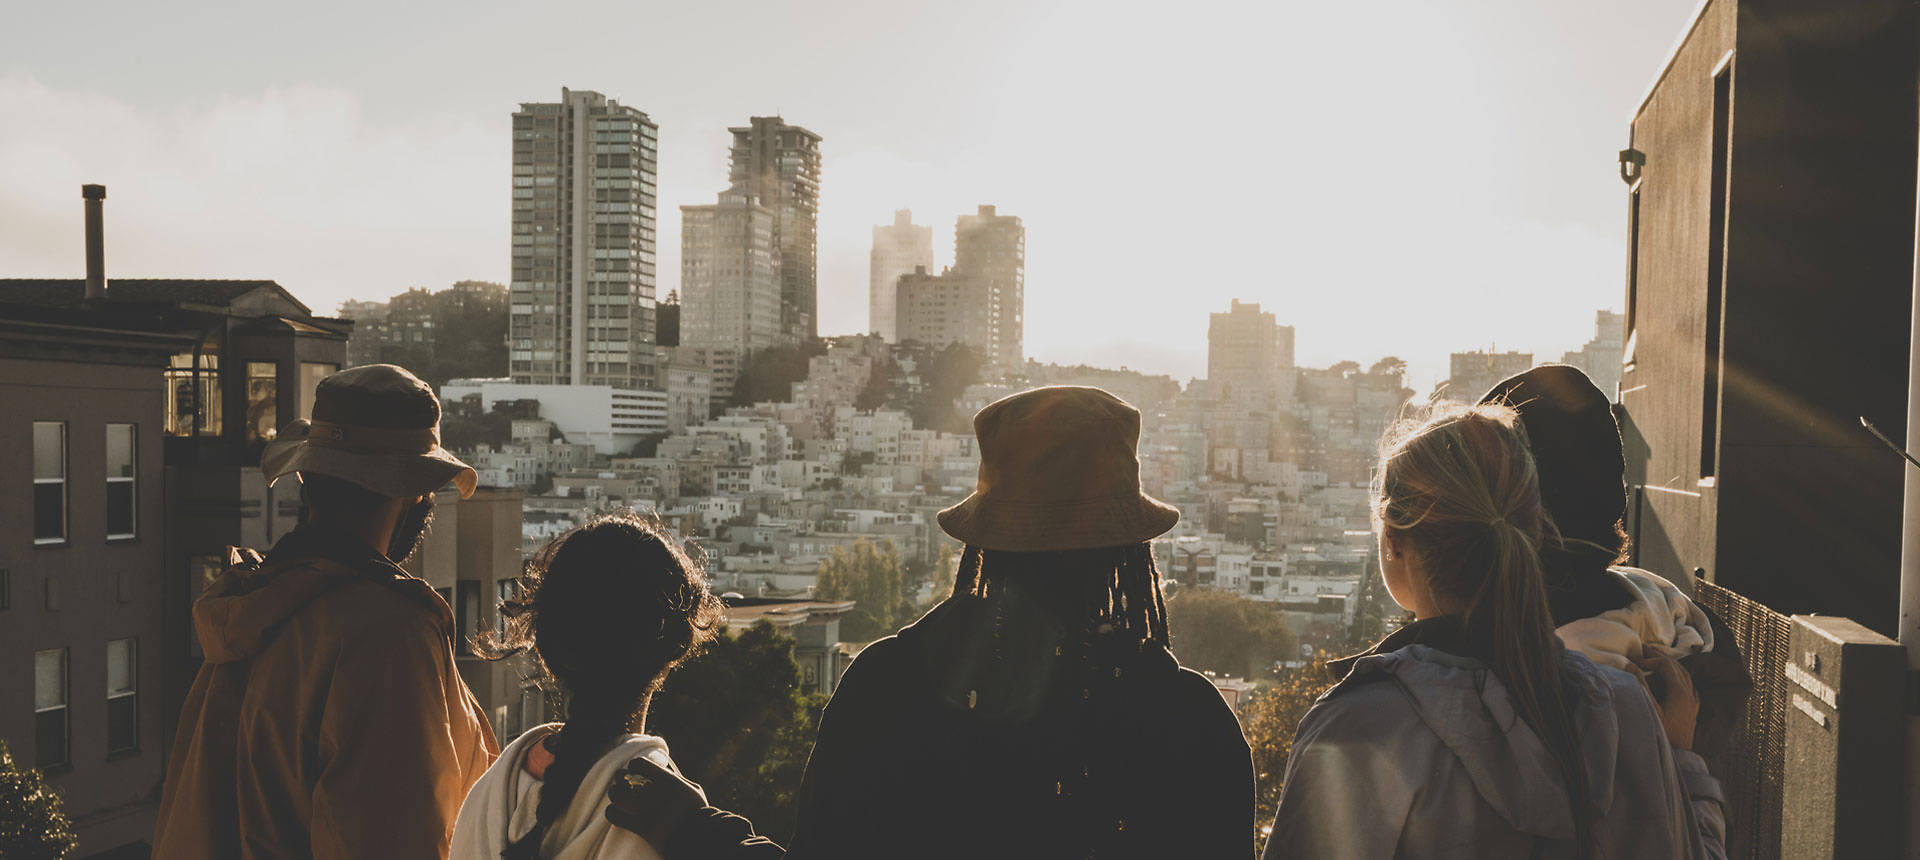 Image of five friends standing together and wearing Timberland jackets and hats, shown from the back. with the sun lighting up their silhouettes as they look out upon a city with white buildings.